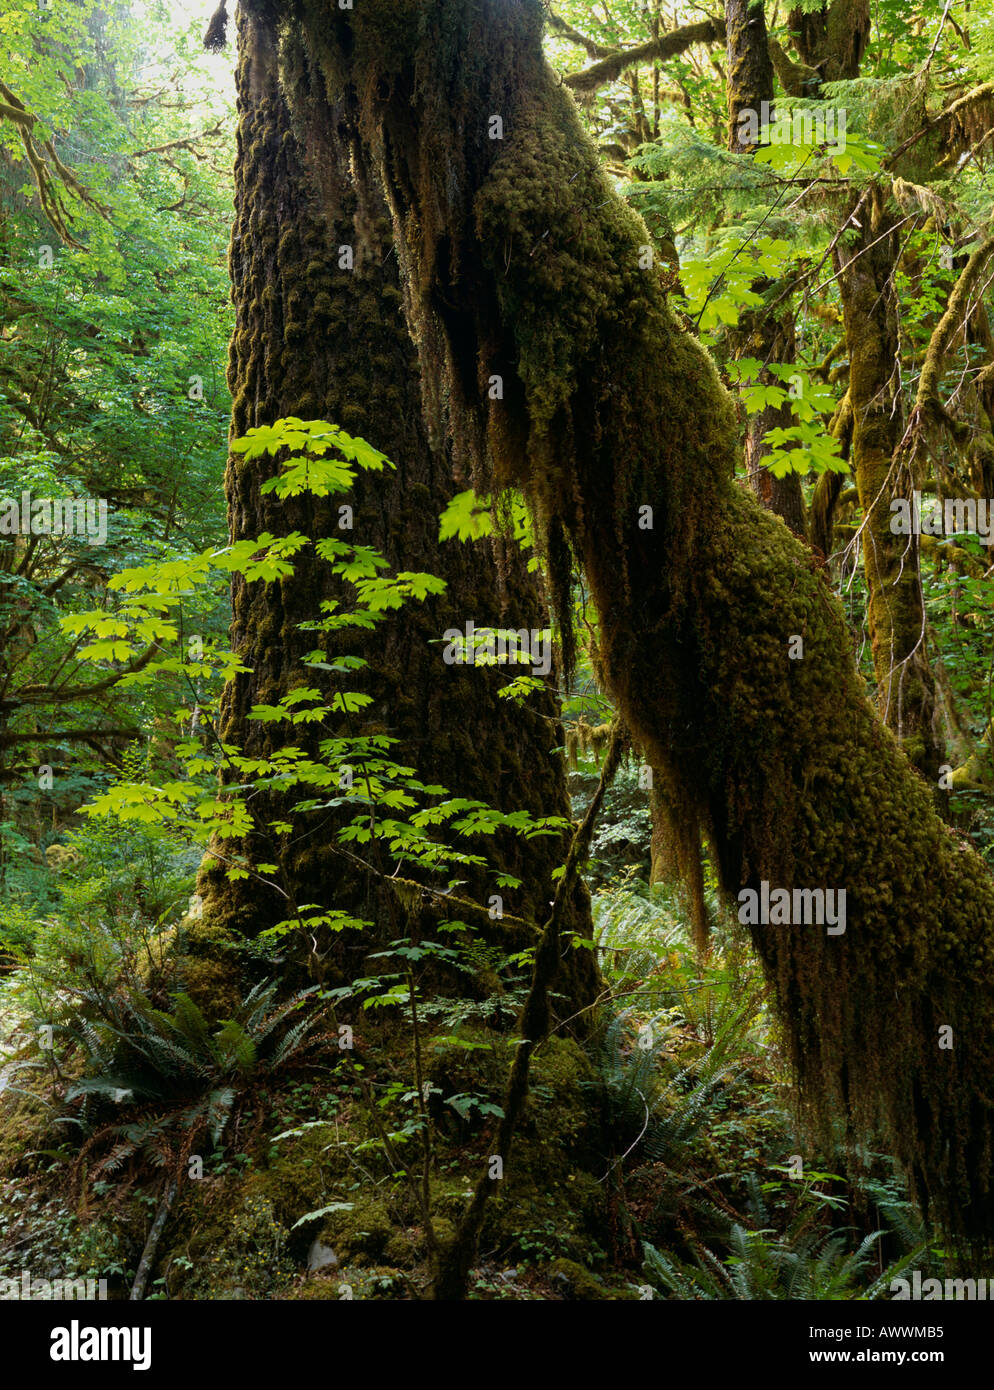 Temperate rainforest, Bigleaf Maple  (Acer Macrophyllum) and Bryophyte covered Douglas Fir, Quinalt Forest, Olympic NP Stock Photo